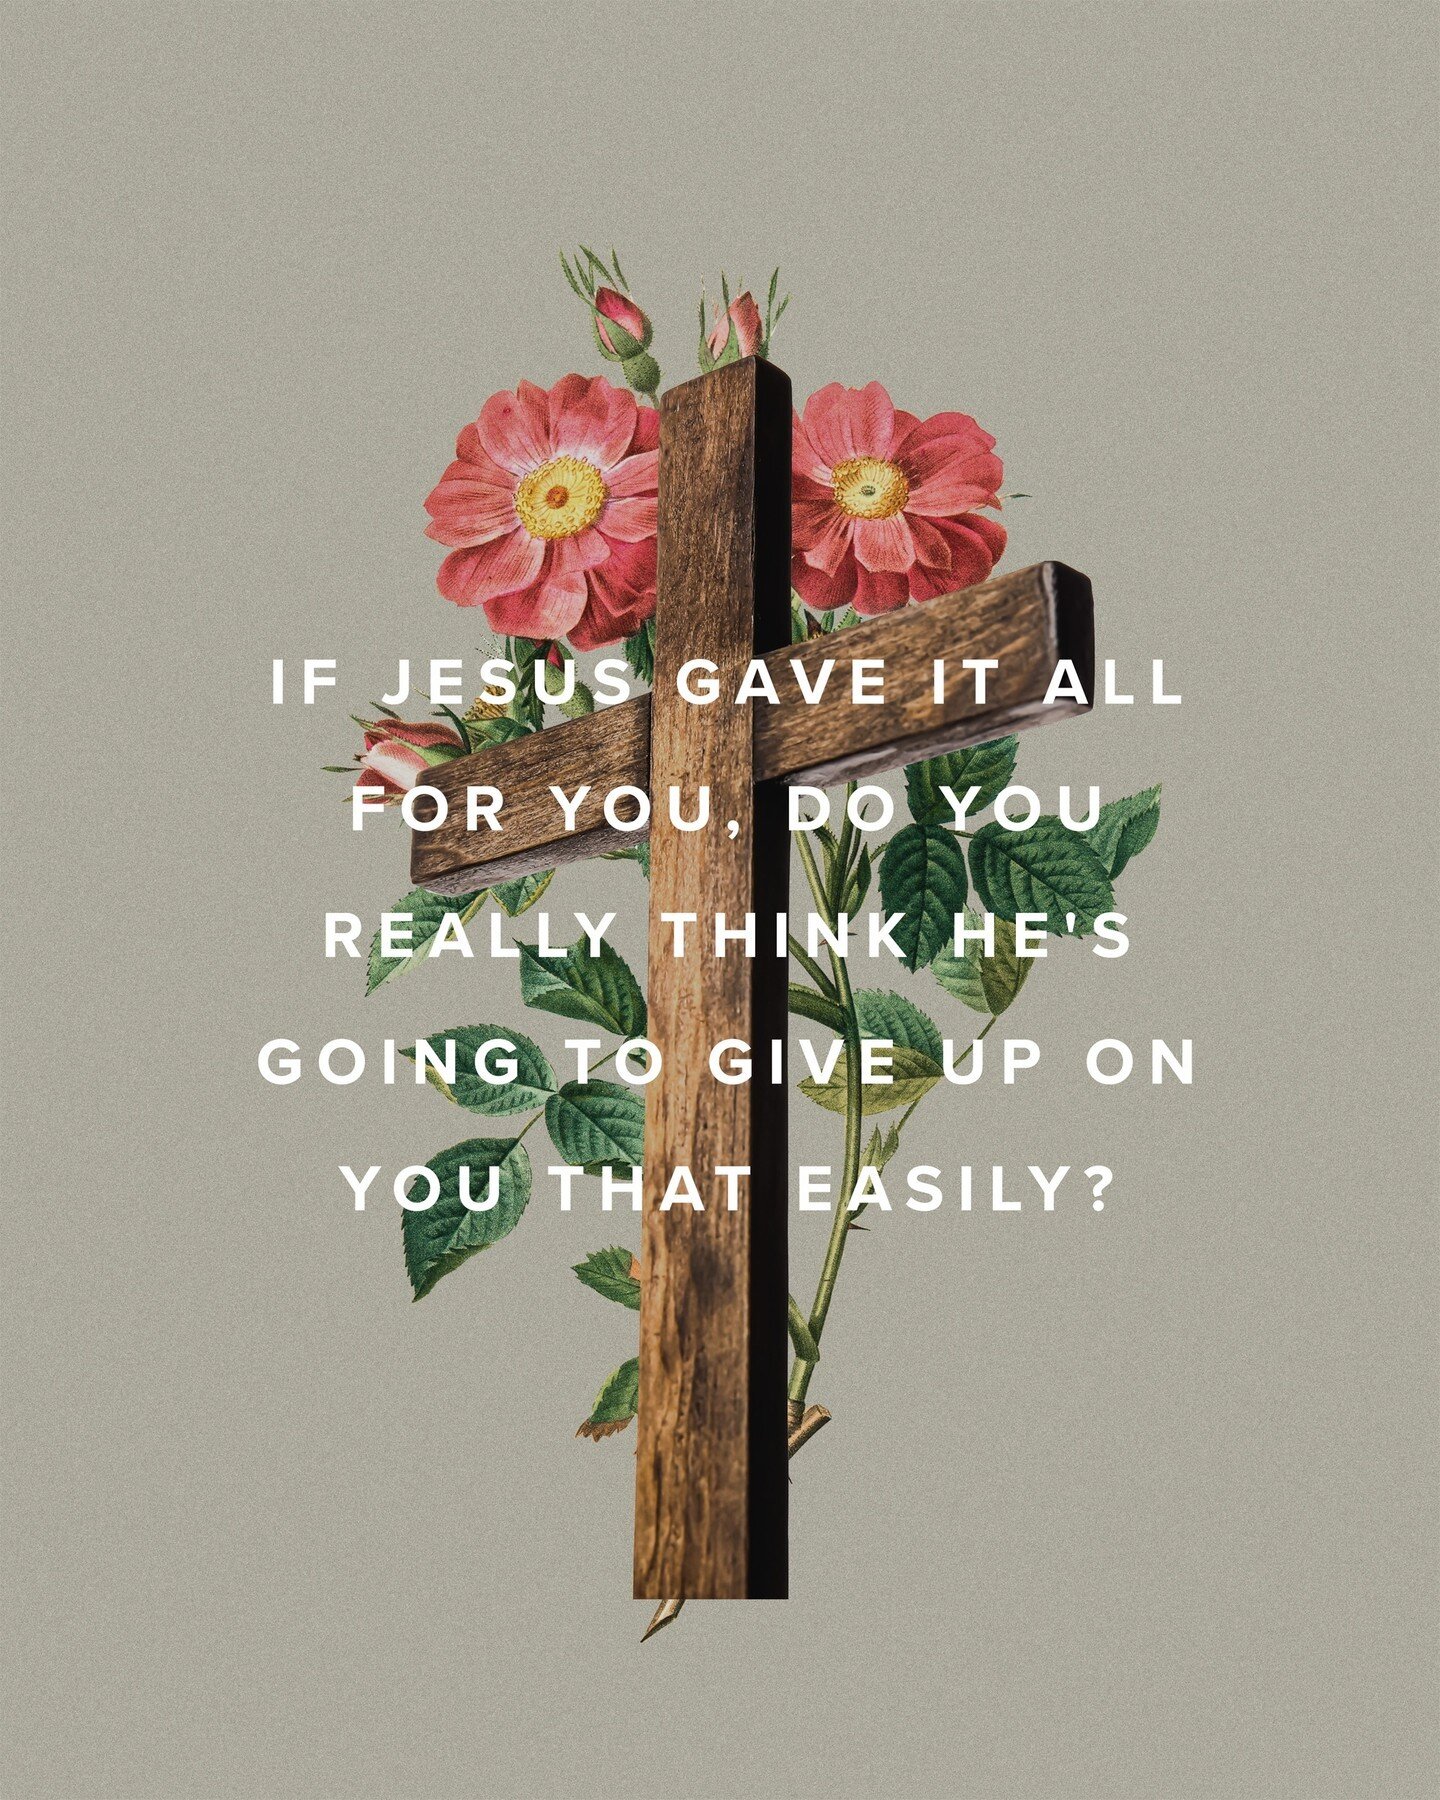 If Jesus gave it all for you, do you really think he's going to give up on you that easily?
.
.
.
#church #god #morning #jesus #christ #love #christian  #grace #salvation